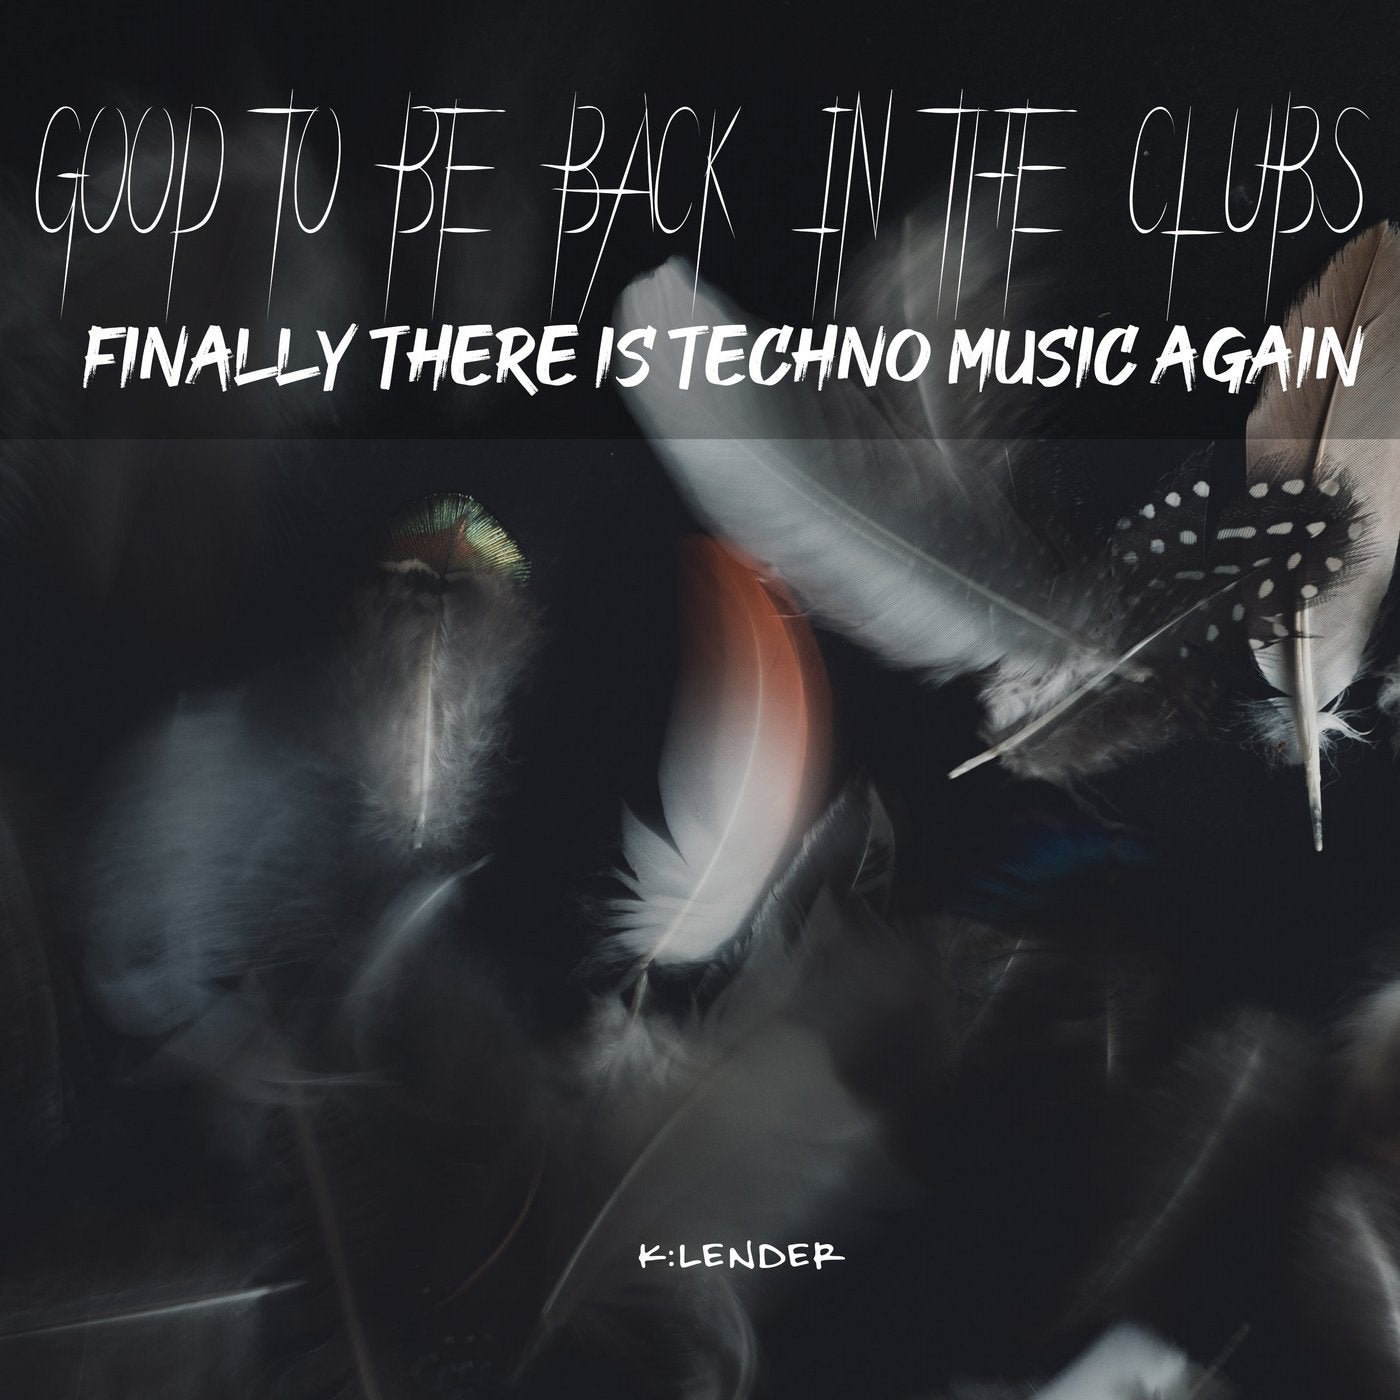 Good to Be Back in the Clubs: Finally There Is Techno Music Again